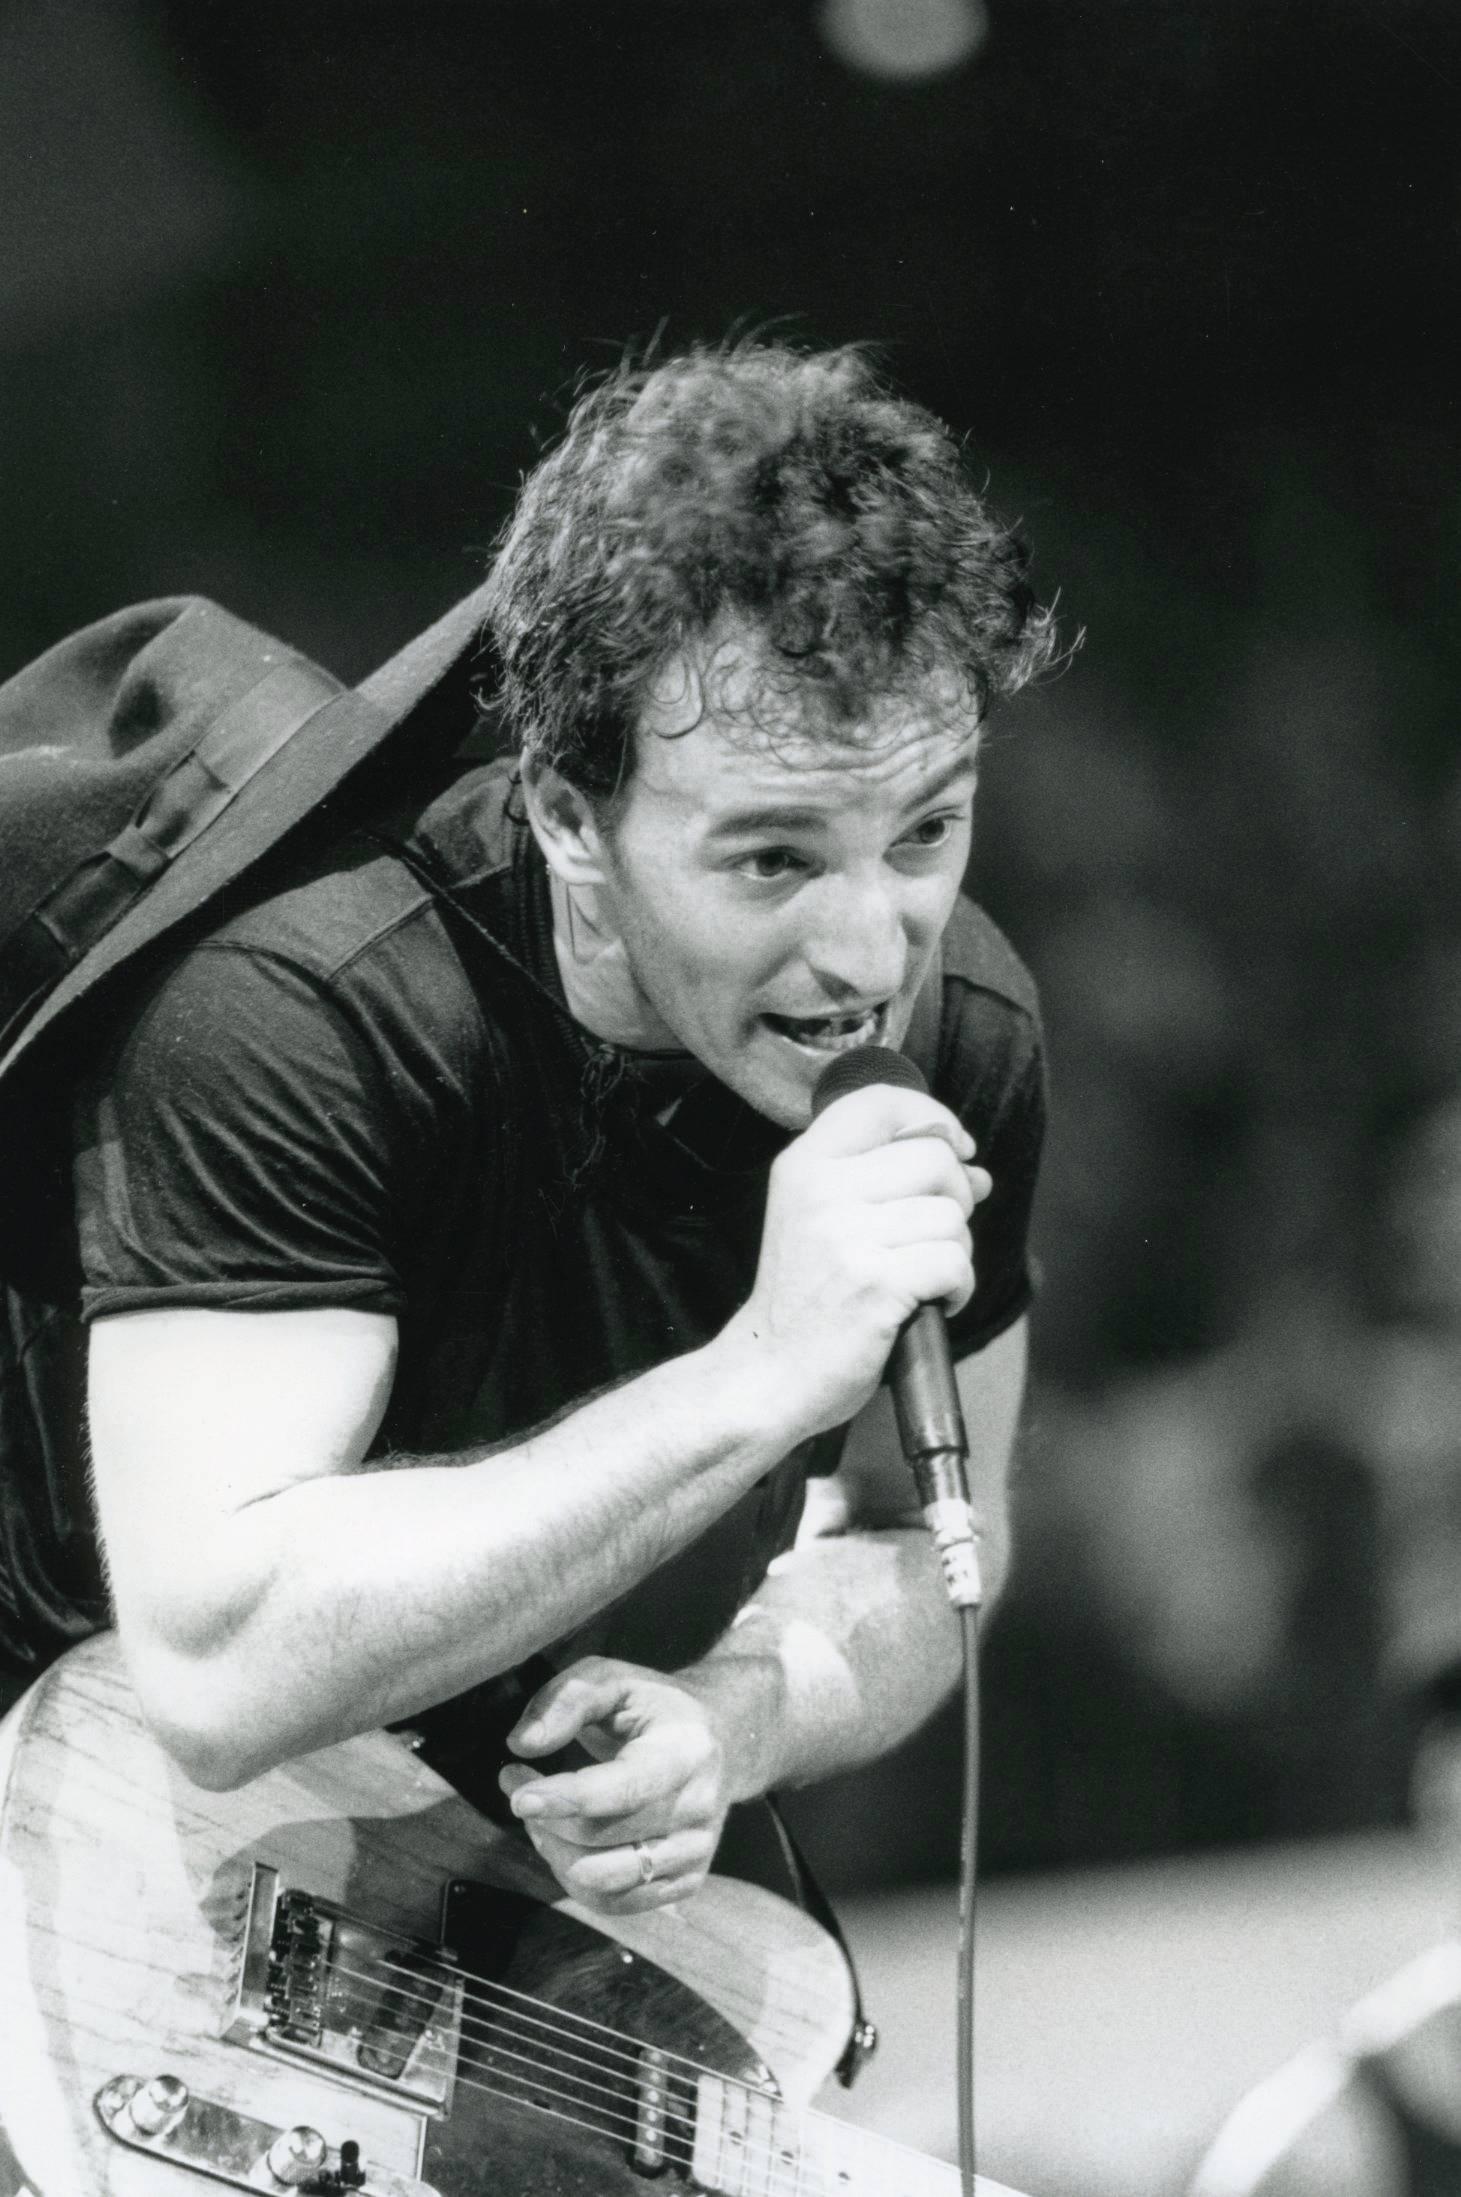 Unknown Black and White Photograph - Bruce Springsteen Live in Concert Vintage Original Photograph